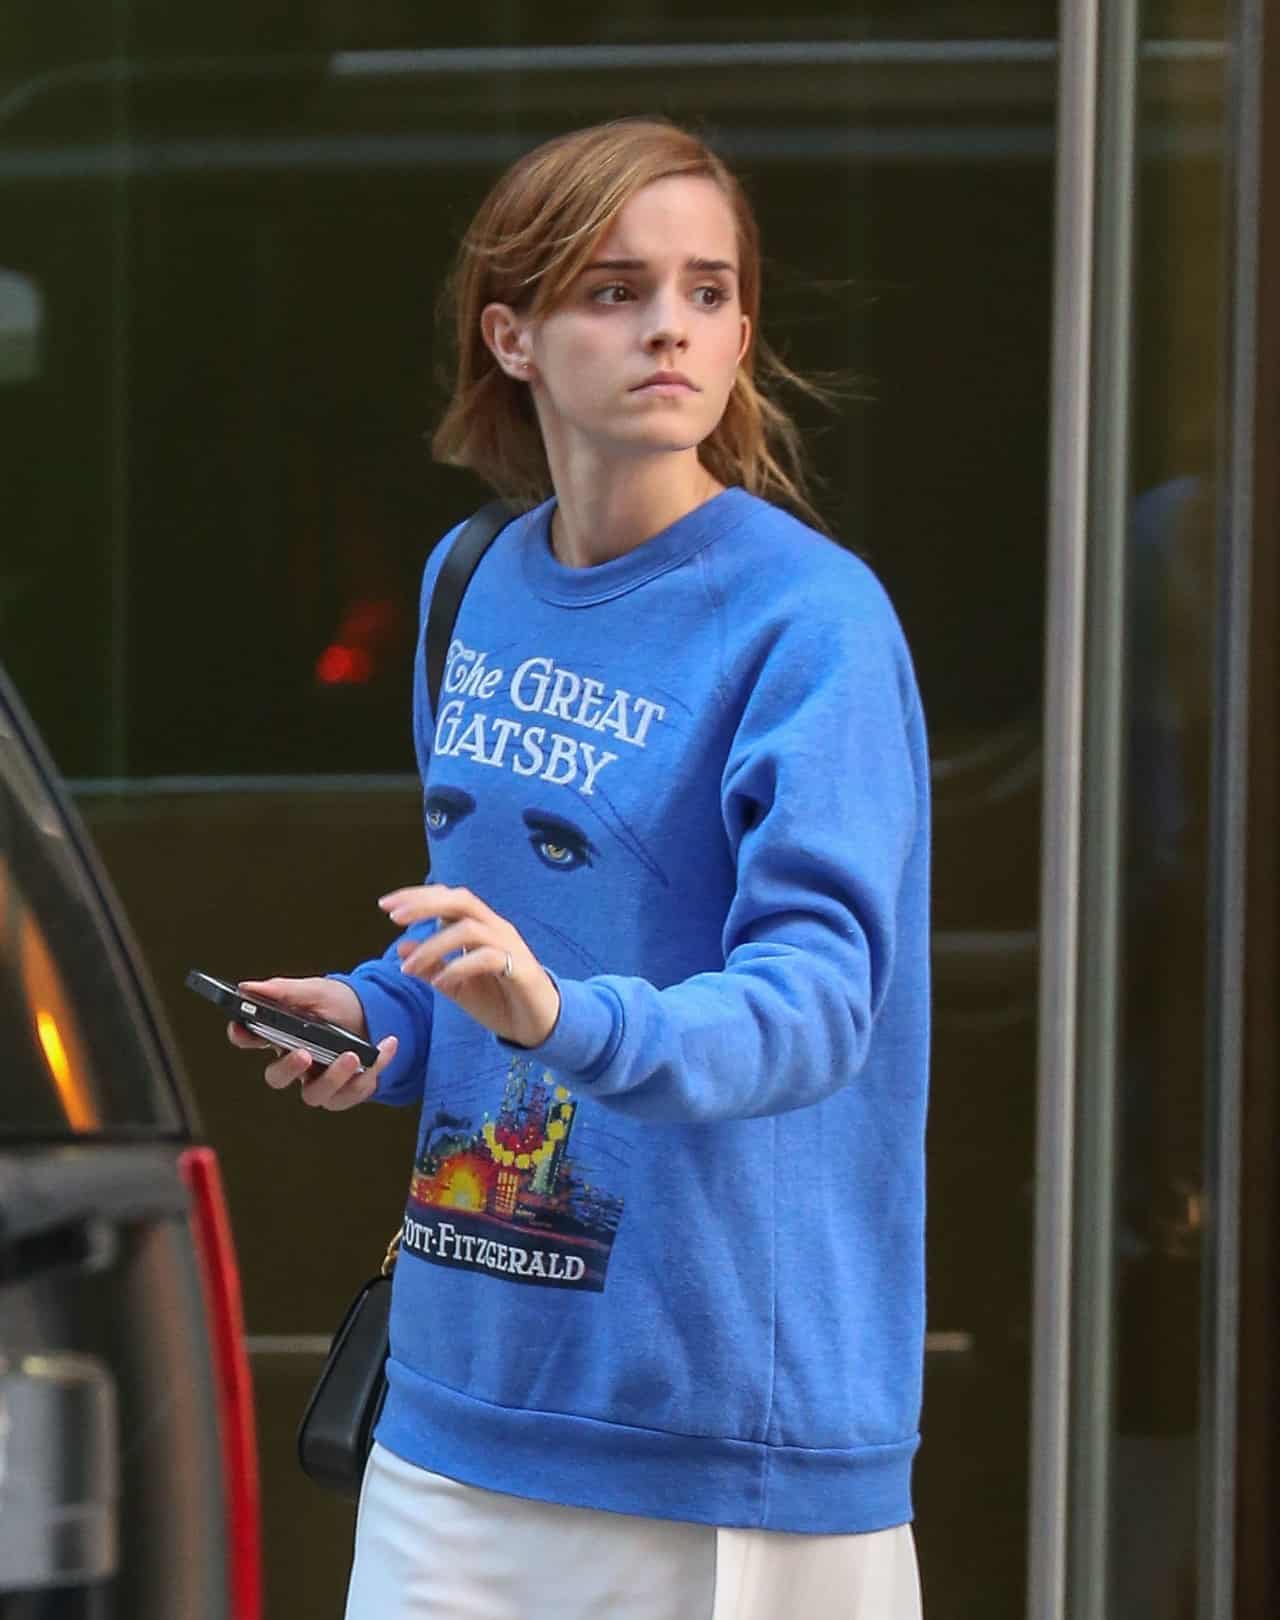 Emma Watson Stuns in Cream Dress and Vibrant Blue Sweater in New York City